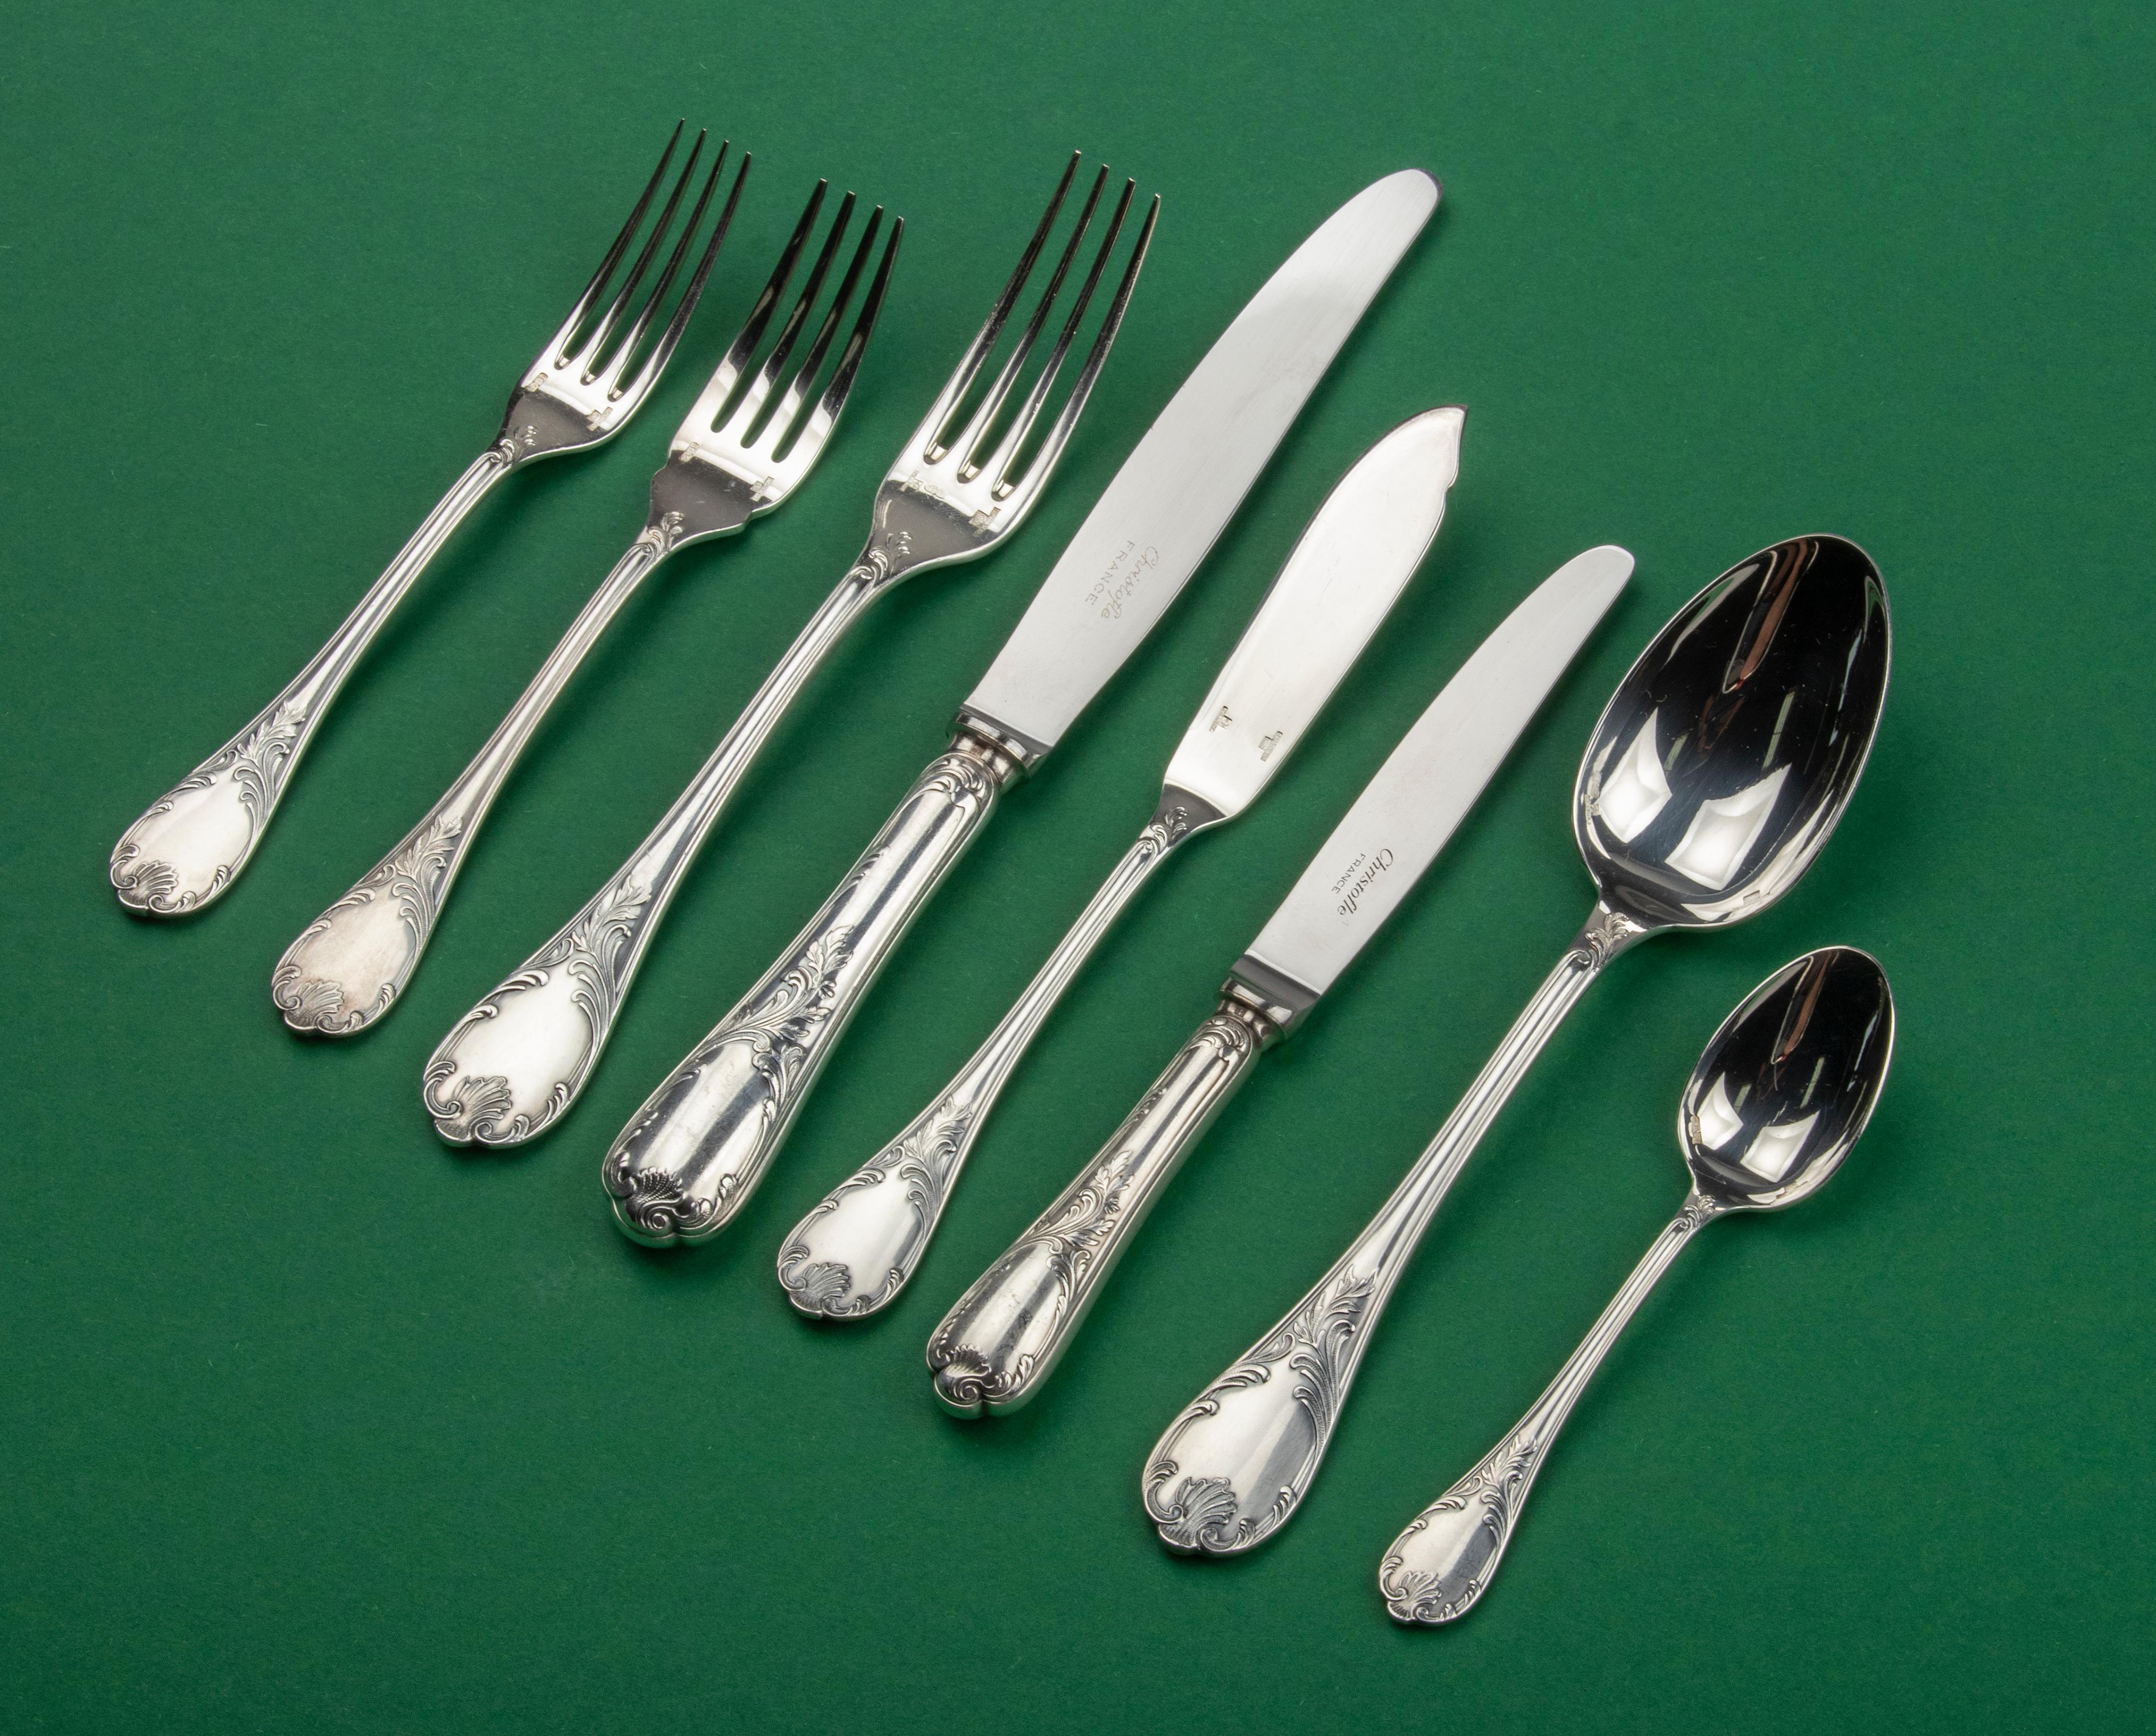 Beautiful set of silver plated table cutlery for 6 persons by the French brand Christofle. The name of the model is Marly, this is the most classic model available from Christofle, it is still being made new. This set is vintage, presumably from the